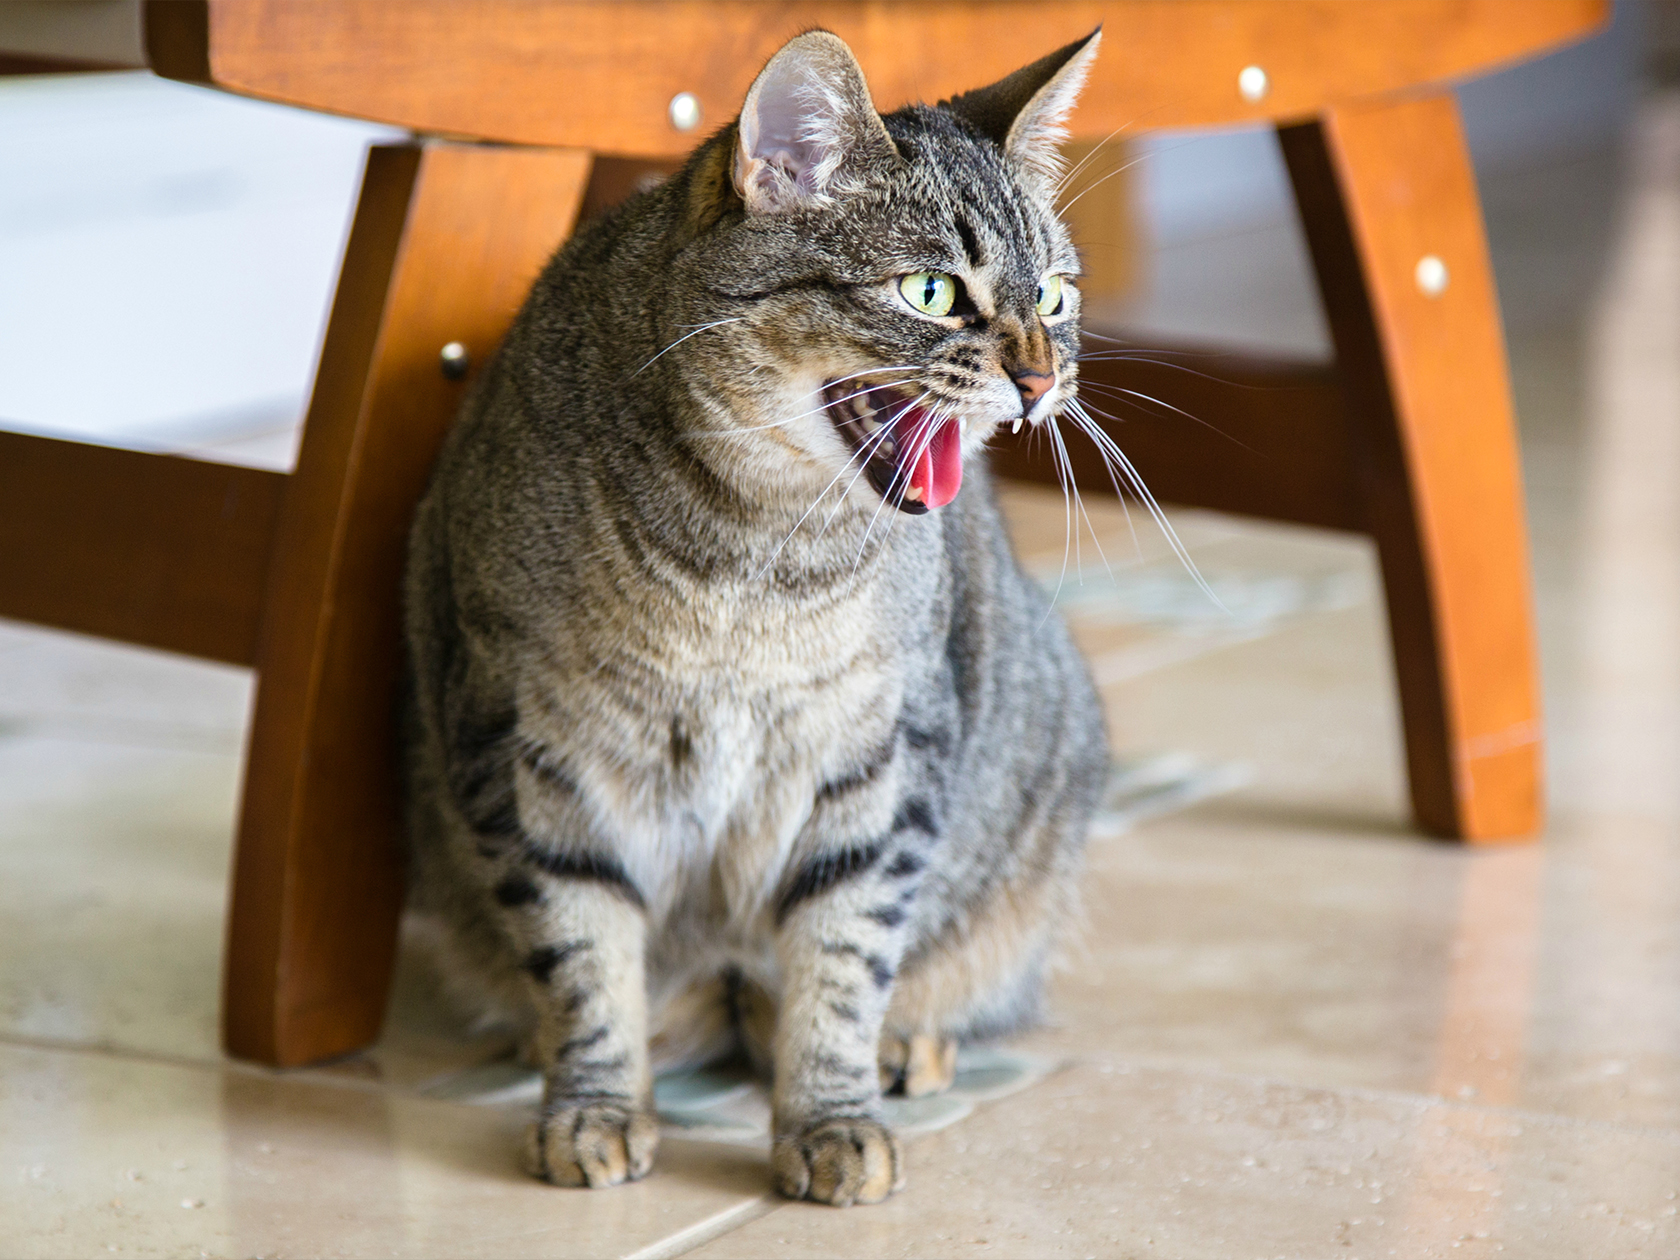 Cat Hissing and Growling? What You Need to Know - The Vets